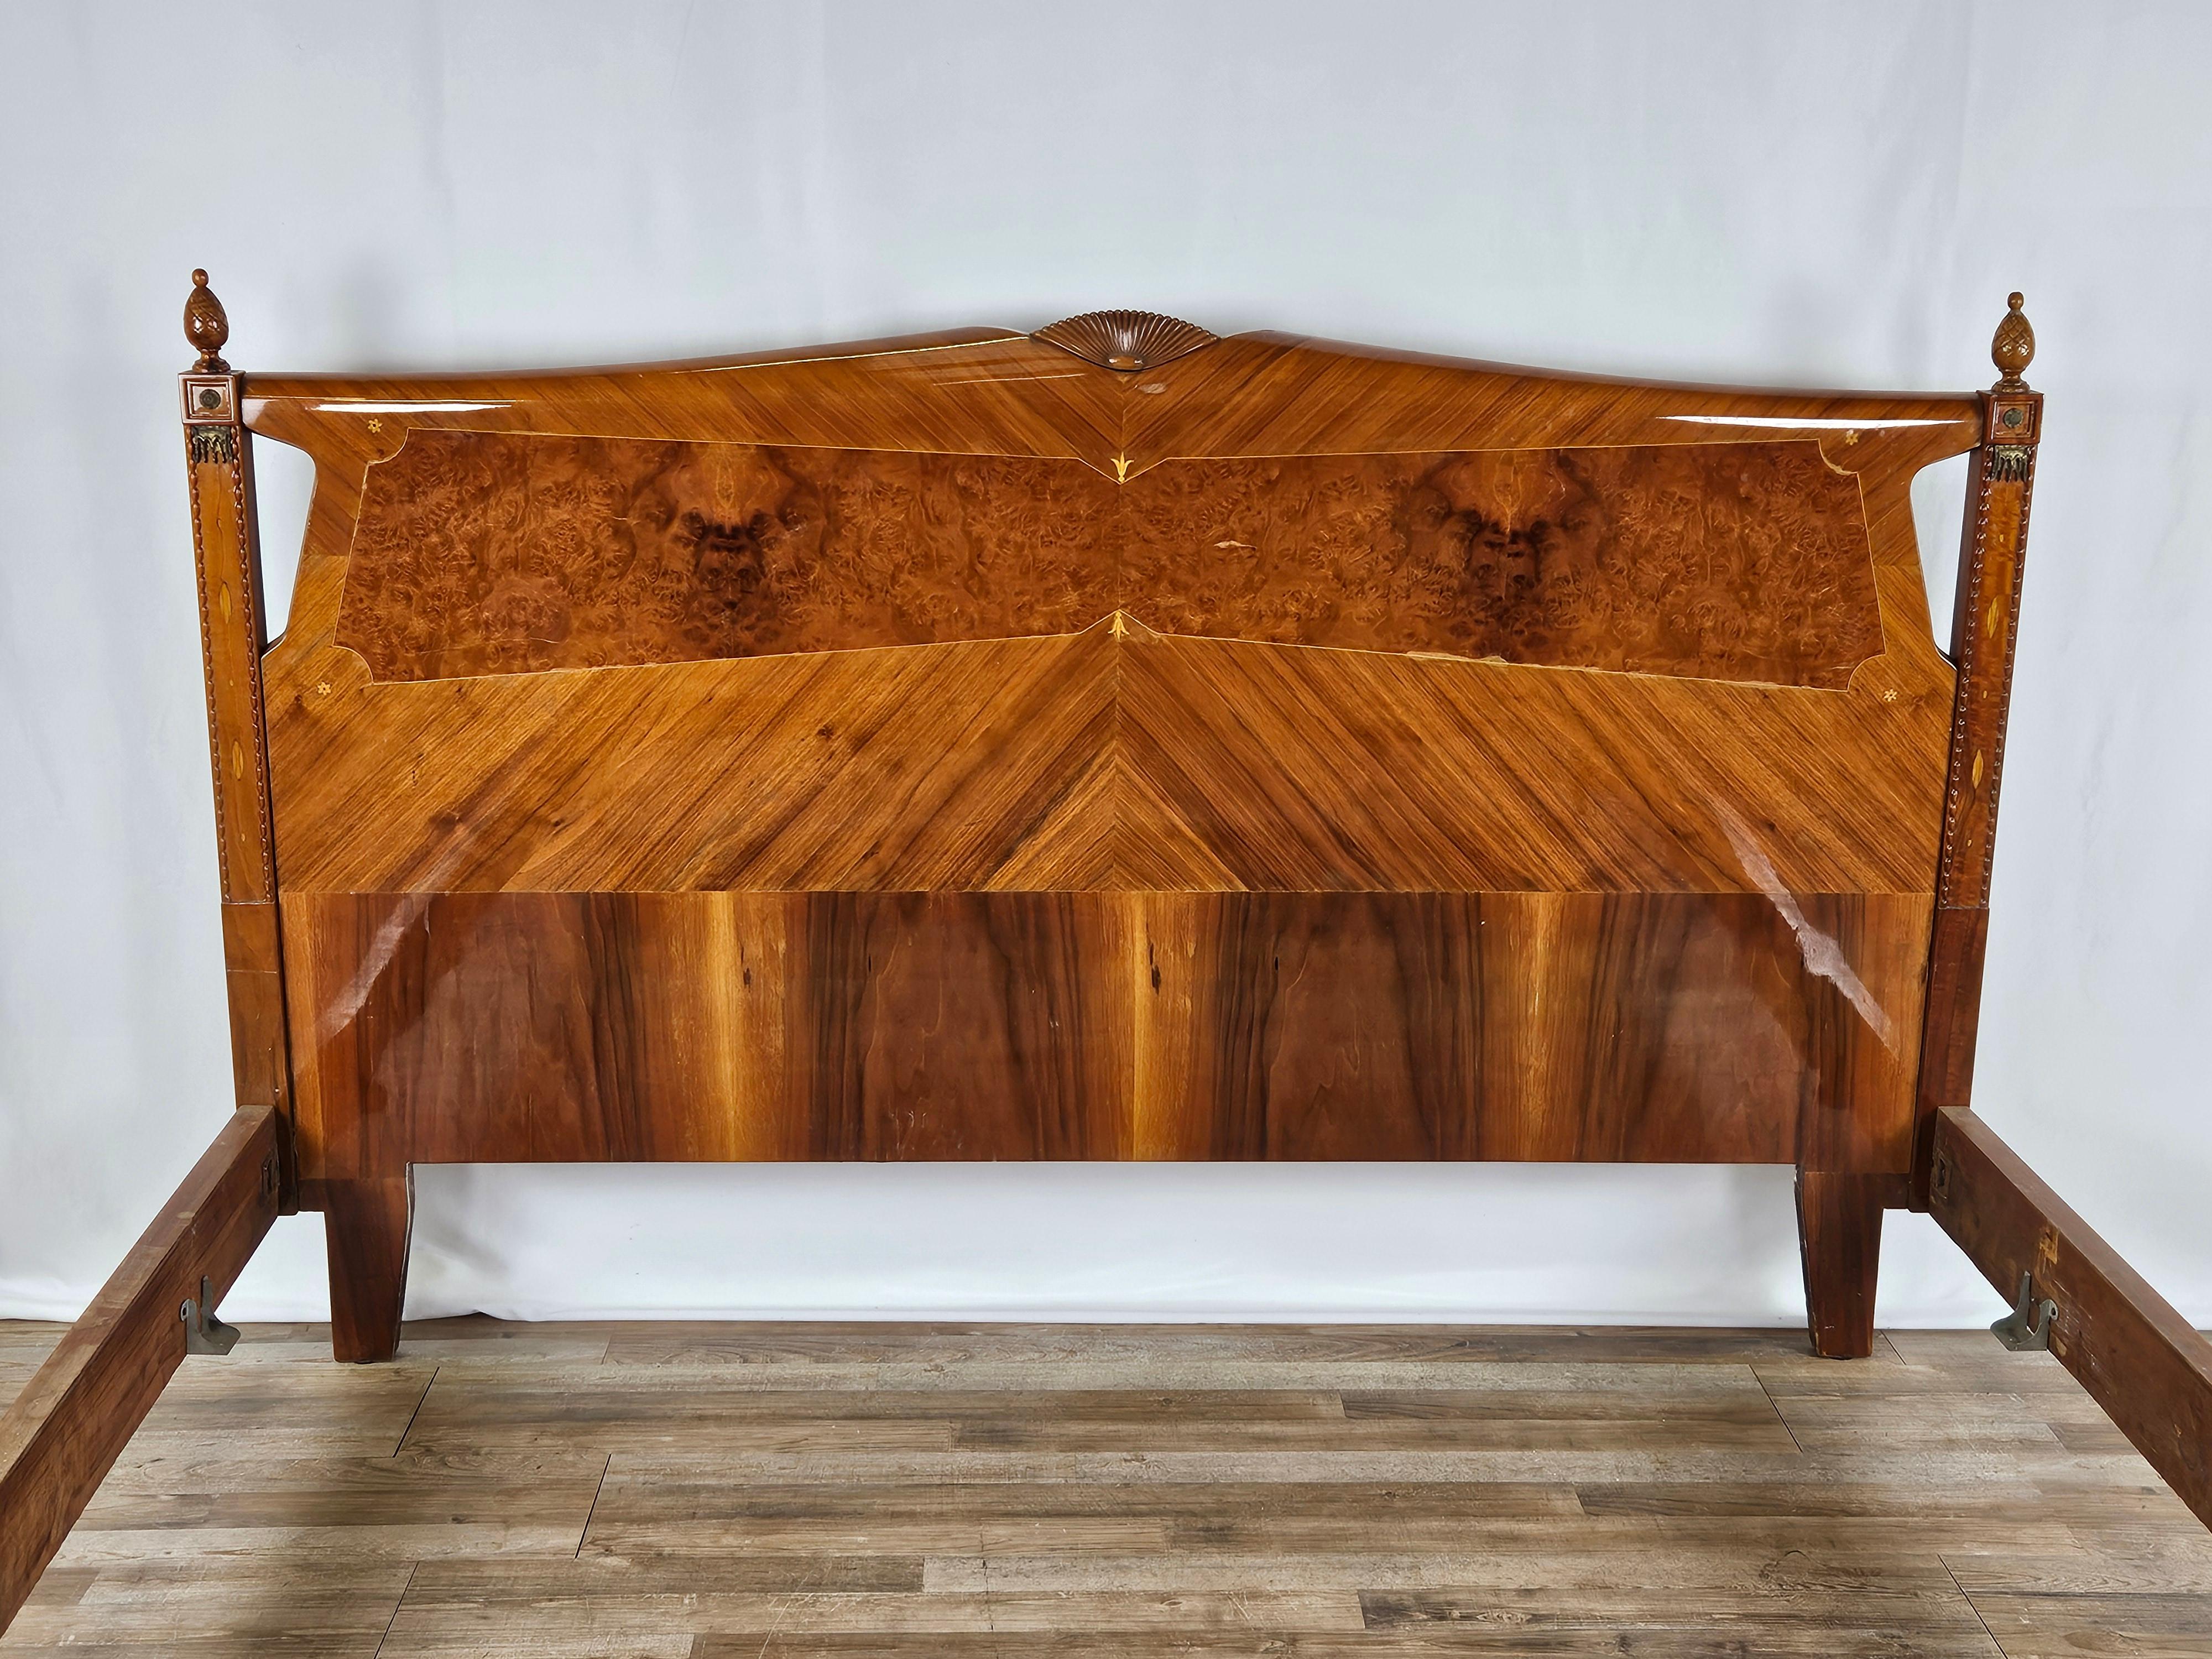 1960s double bed with inlaid and carved wooden frame with briarwood, very fine and elegant thanks to the soft and light lines.

It features various decorations along the headboard and footboard, and also has two feet and various brass